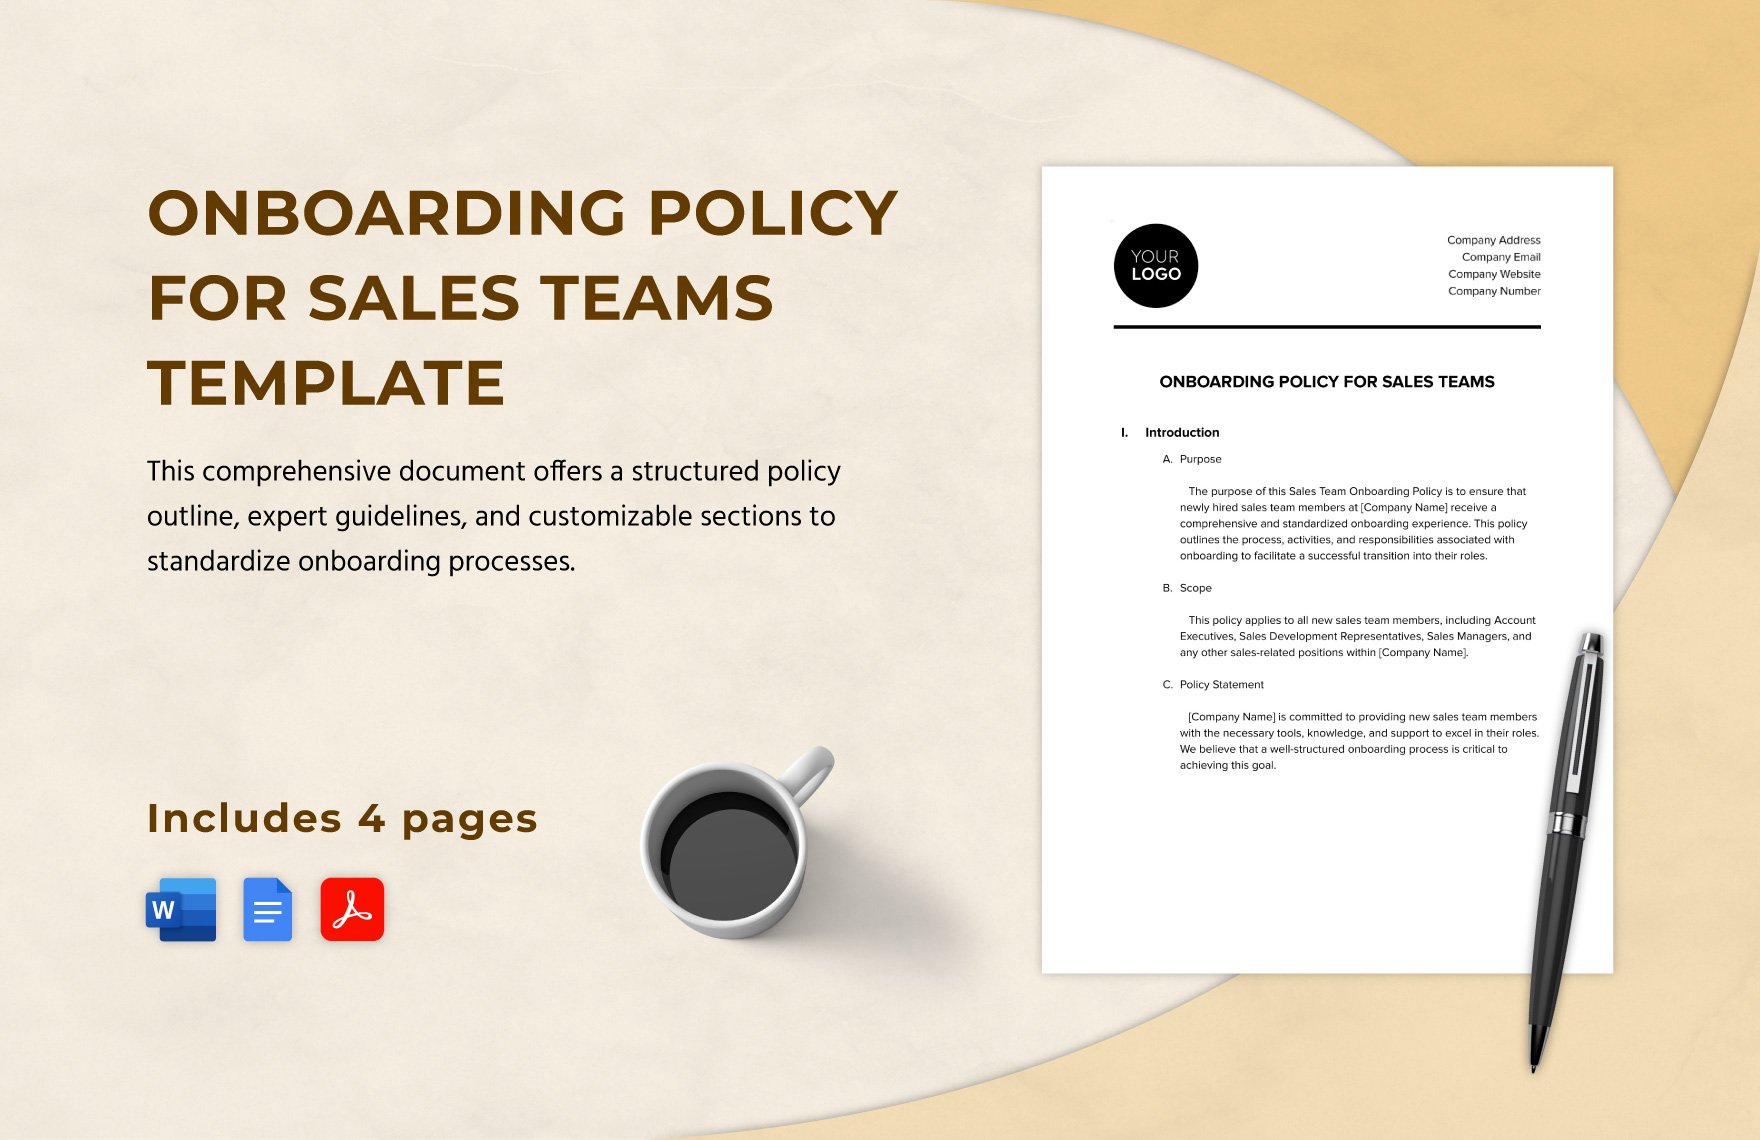 Onboarding Policy for Sales Teams Template